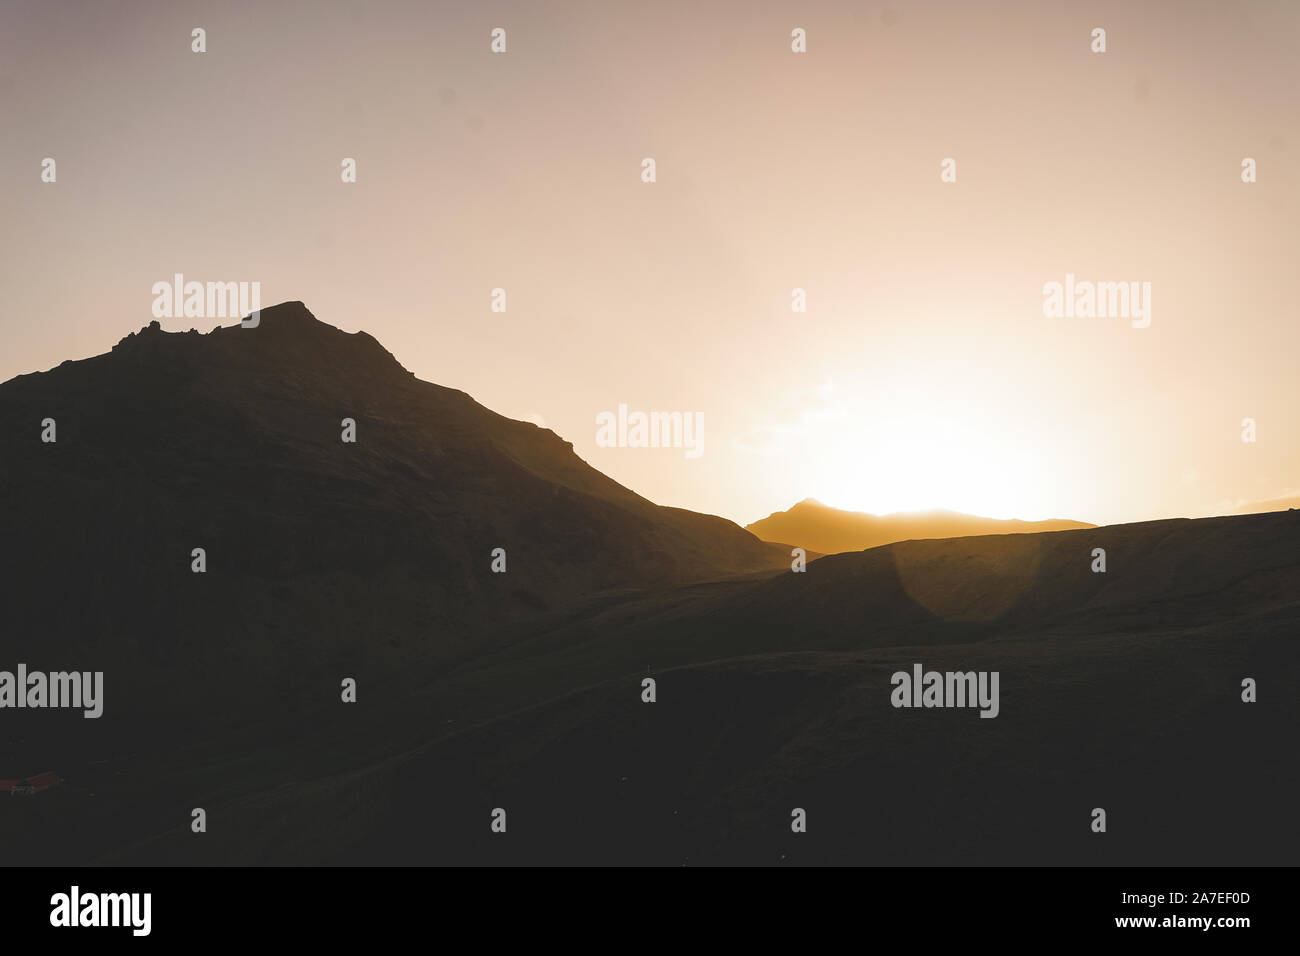 High Contrast Silhouette Iceland Landscape Sunrise Quiet Morning Travel Hills Stock Photo